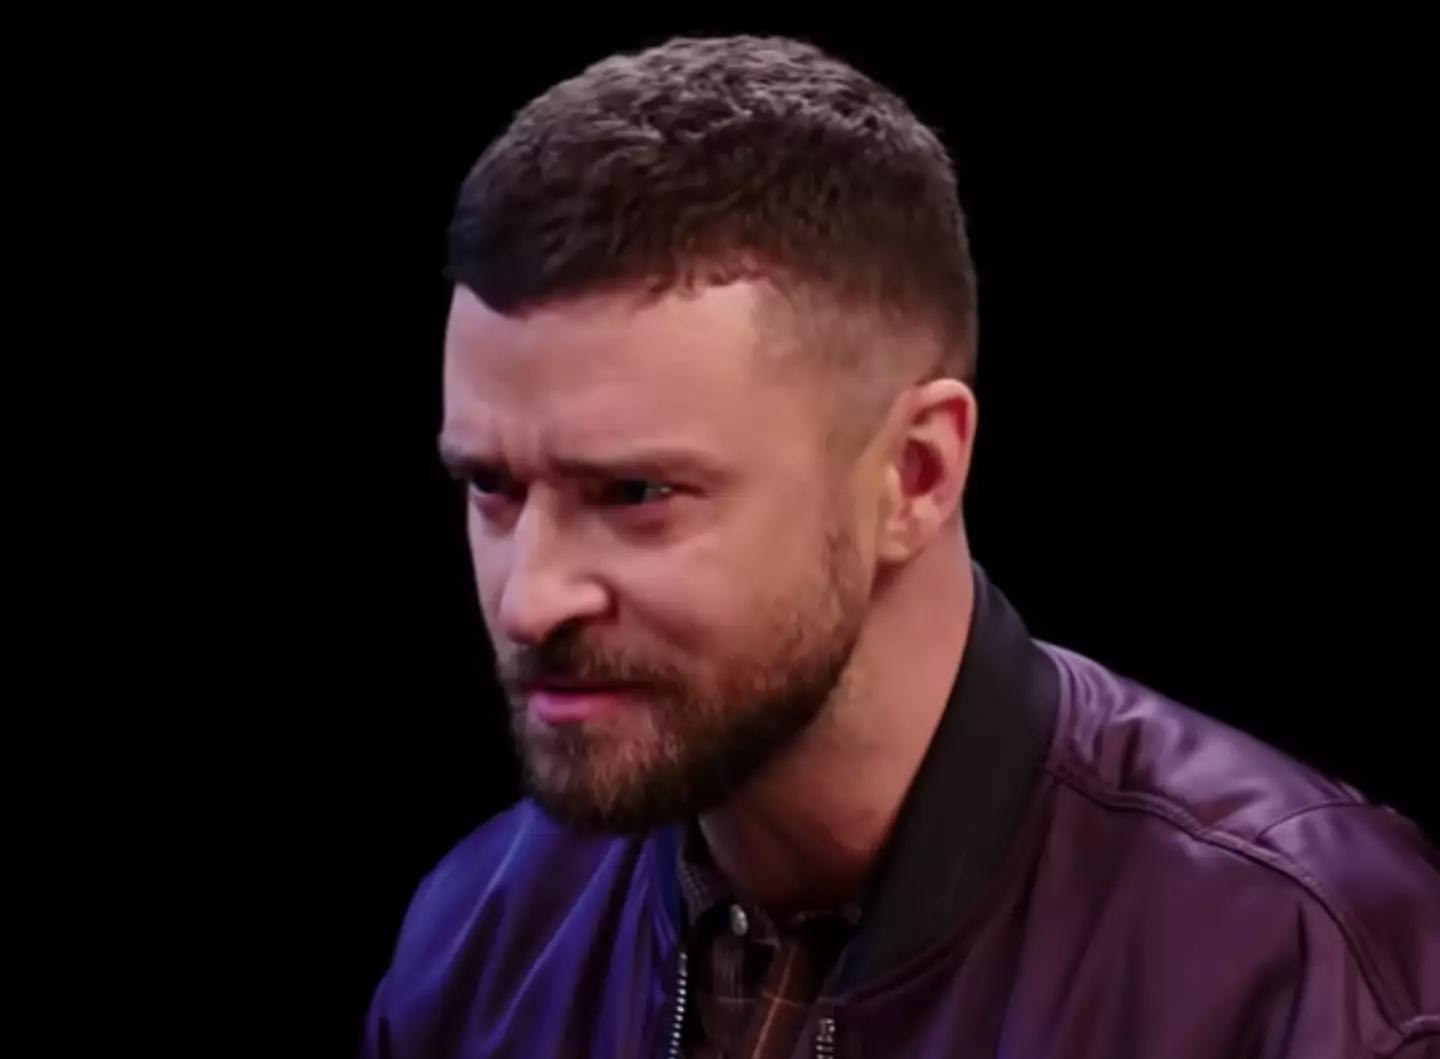 Justin Timberlake revealed the reason he pronounced 'me' as 'may' in 'It's Gonna Be Me'.